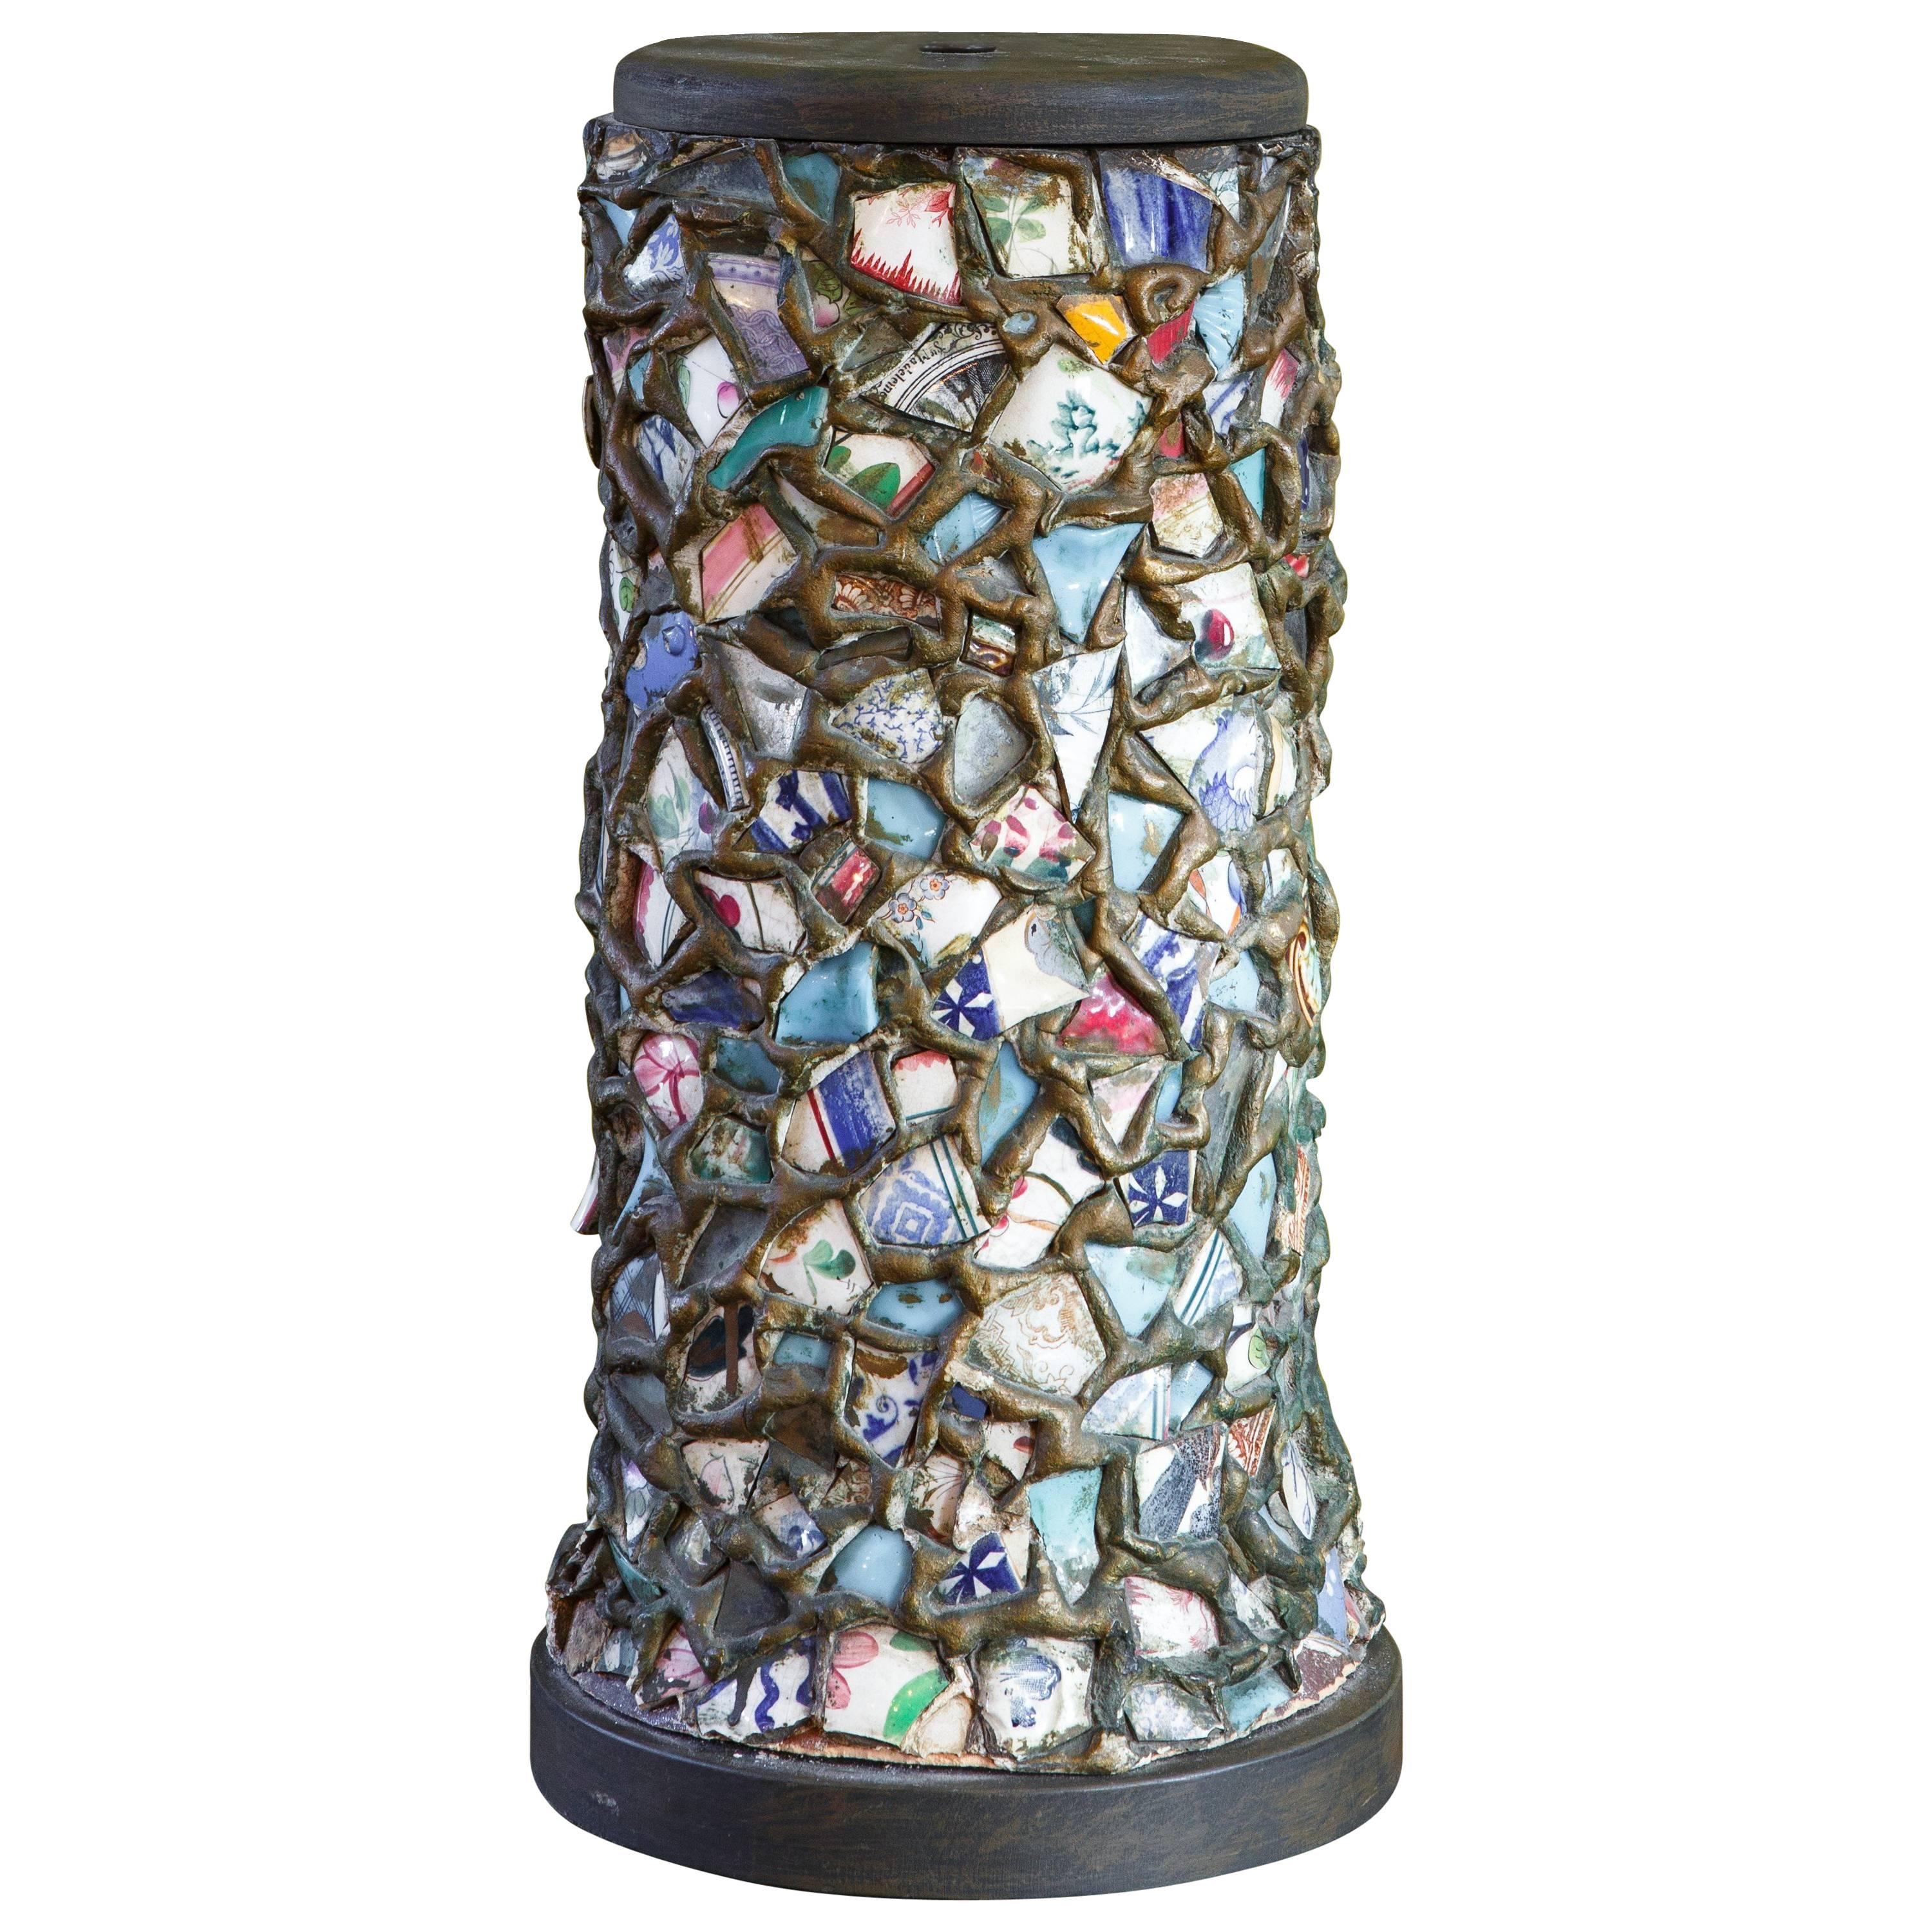 Mosaic memory ware table lamp from broken pieces of porcelain. This charming lamp was found in France and is truly a one-of-a-kind piece of art. The background 